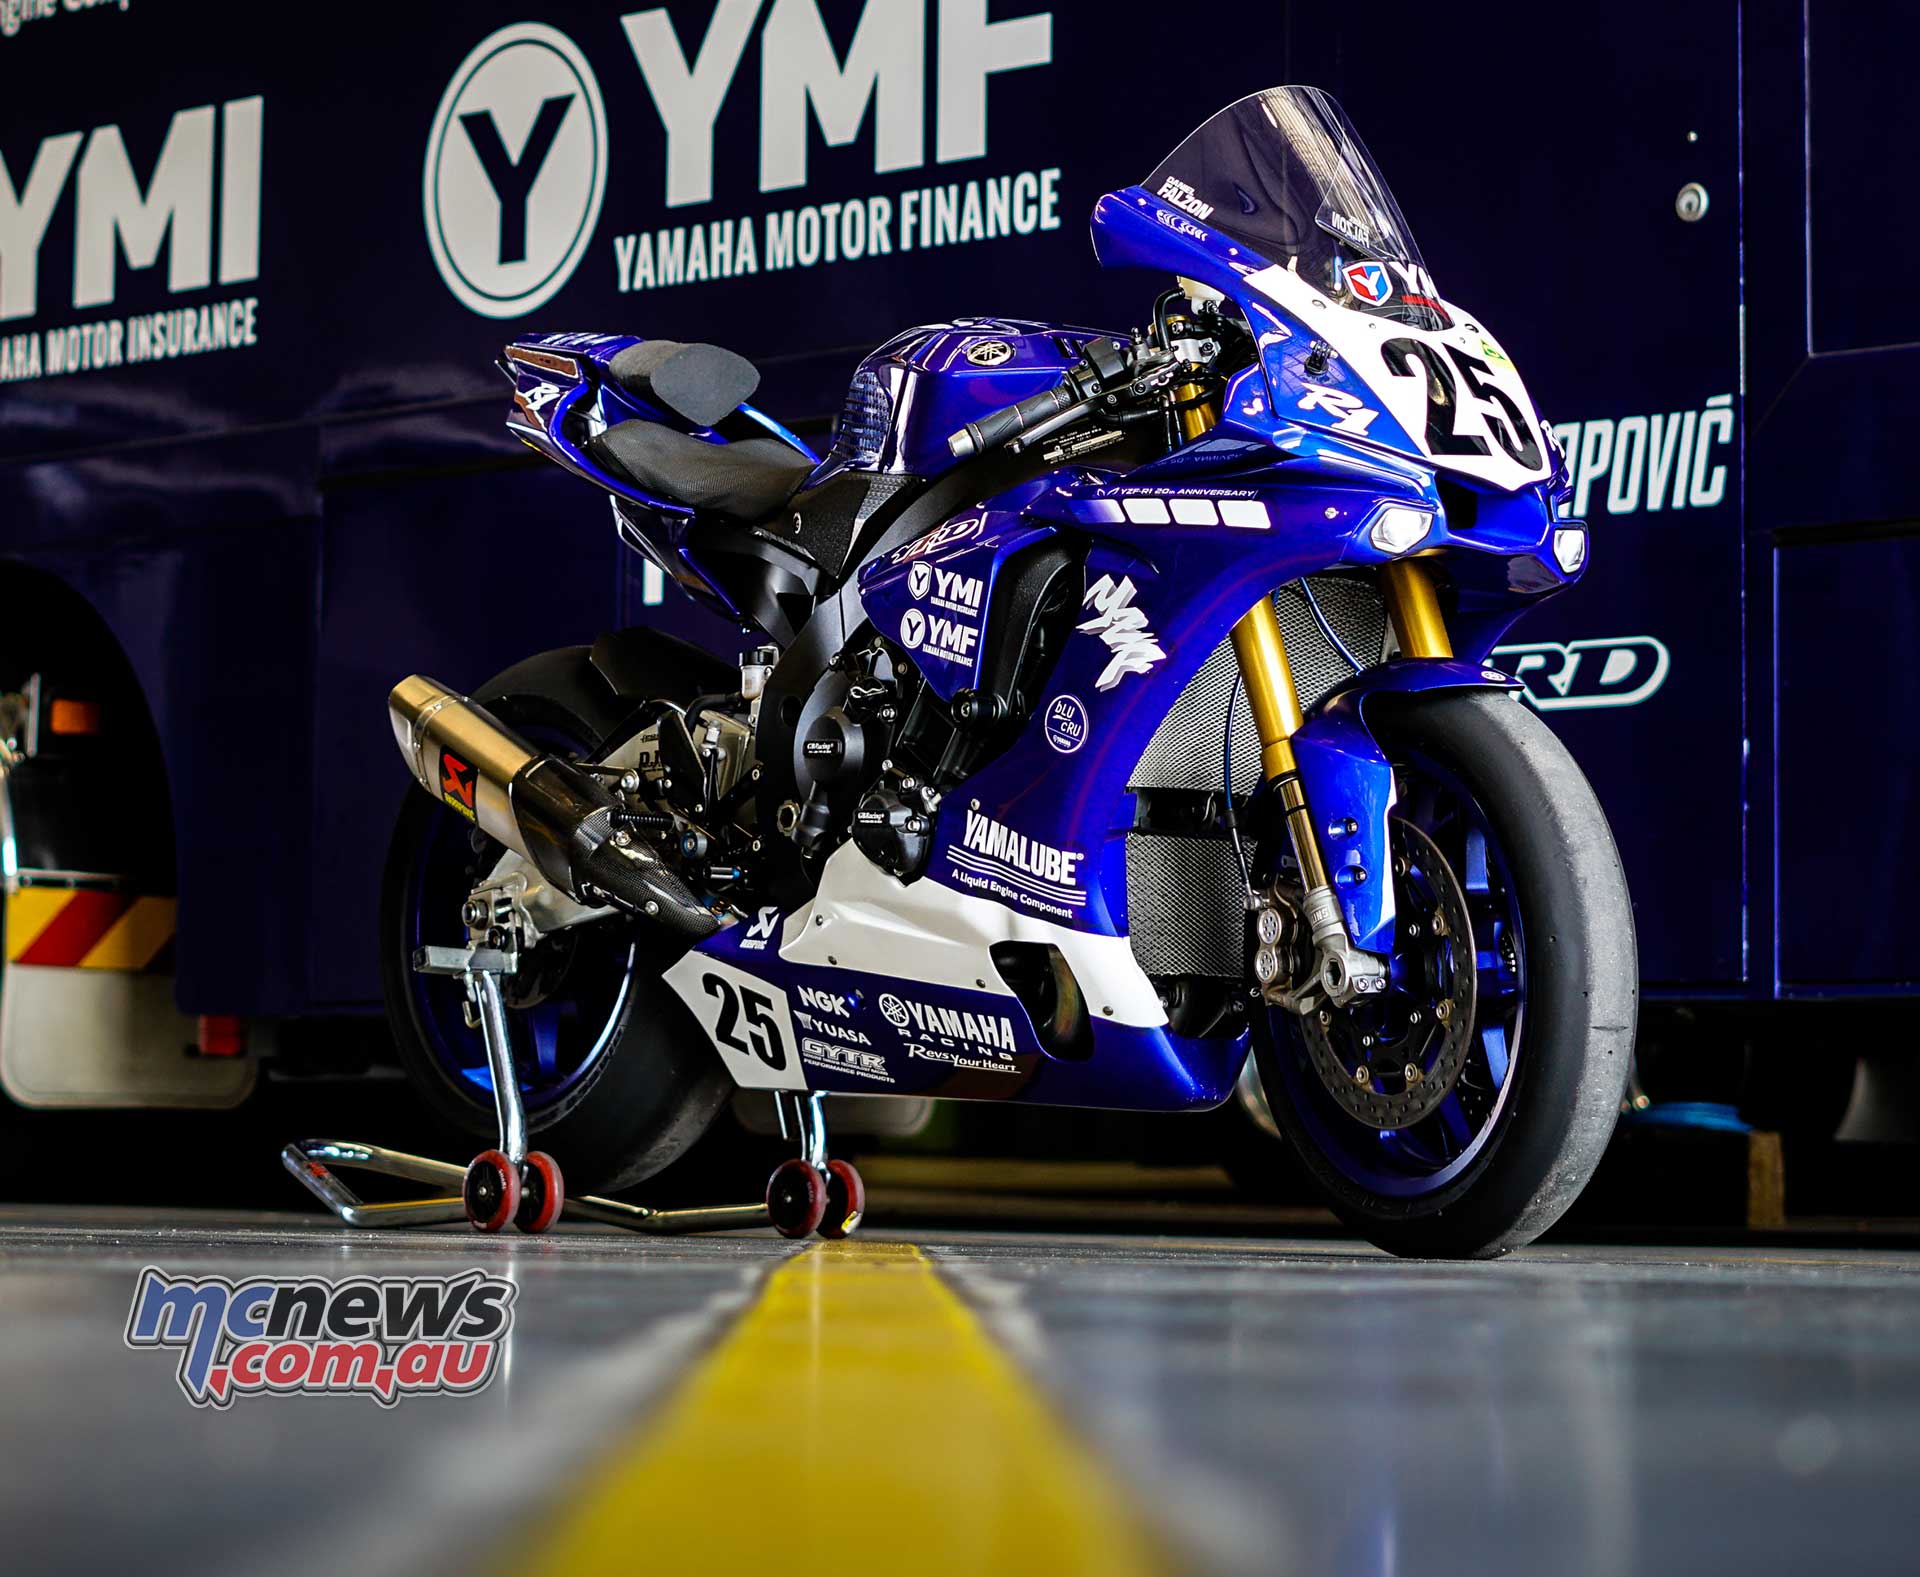 Yrt To Run th Anniversary Yzf R1 Livery At The Bend Mcnews